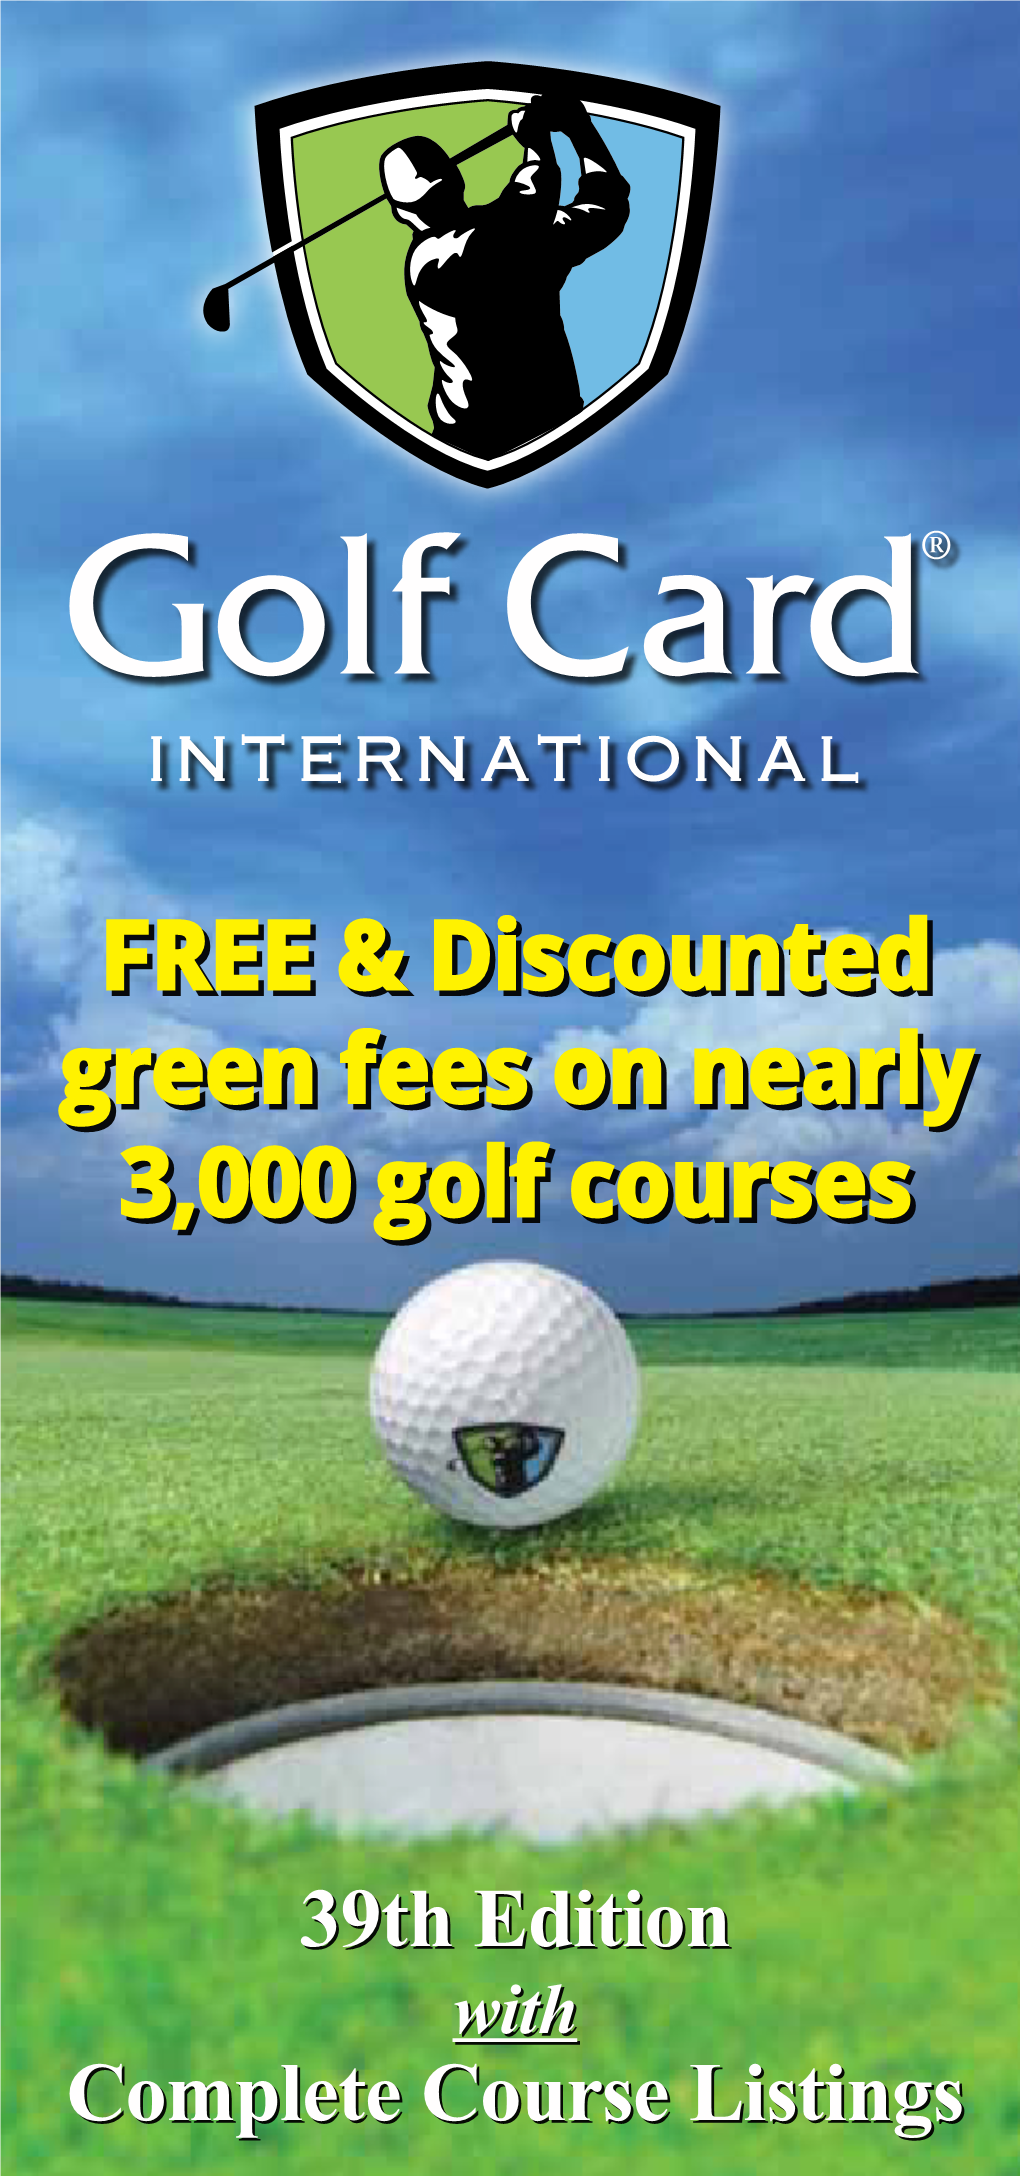 FREE & Discounted Green Fees on Nearly 3000 Golf Courses